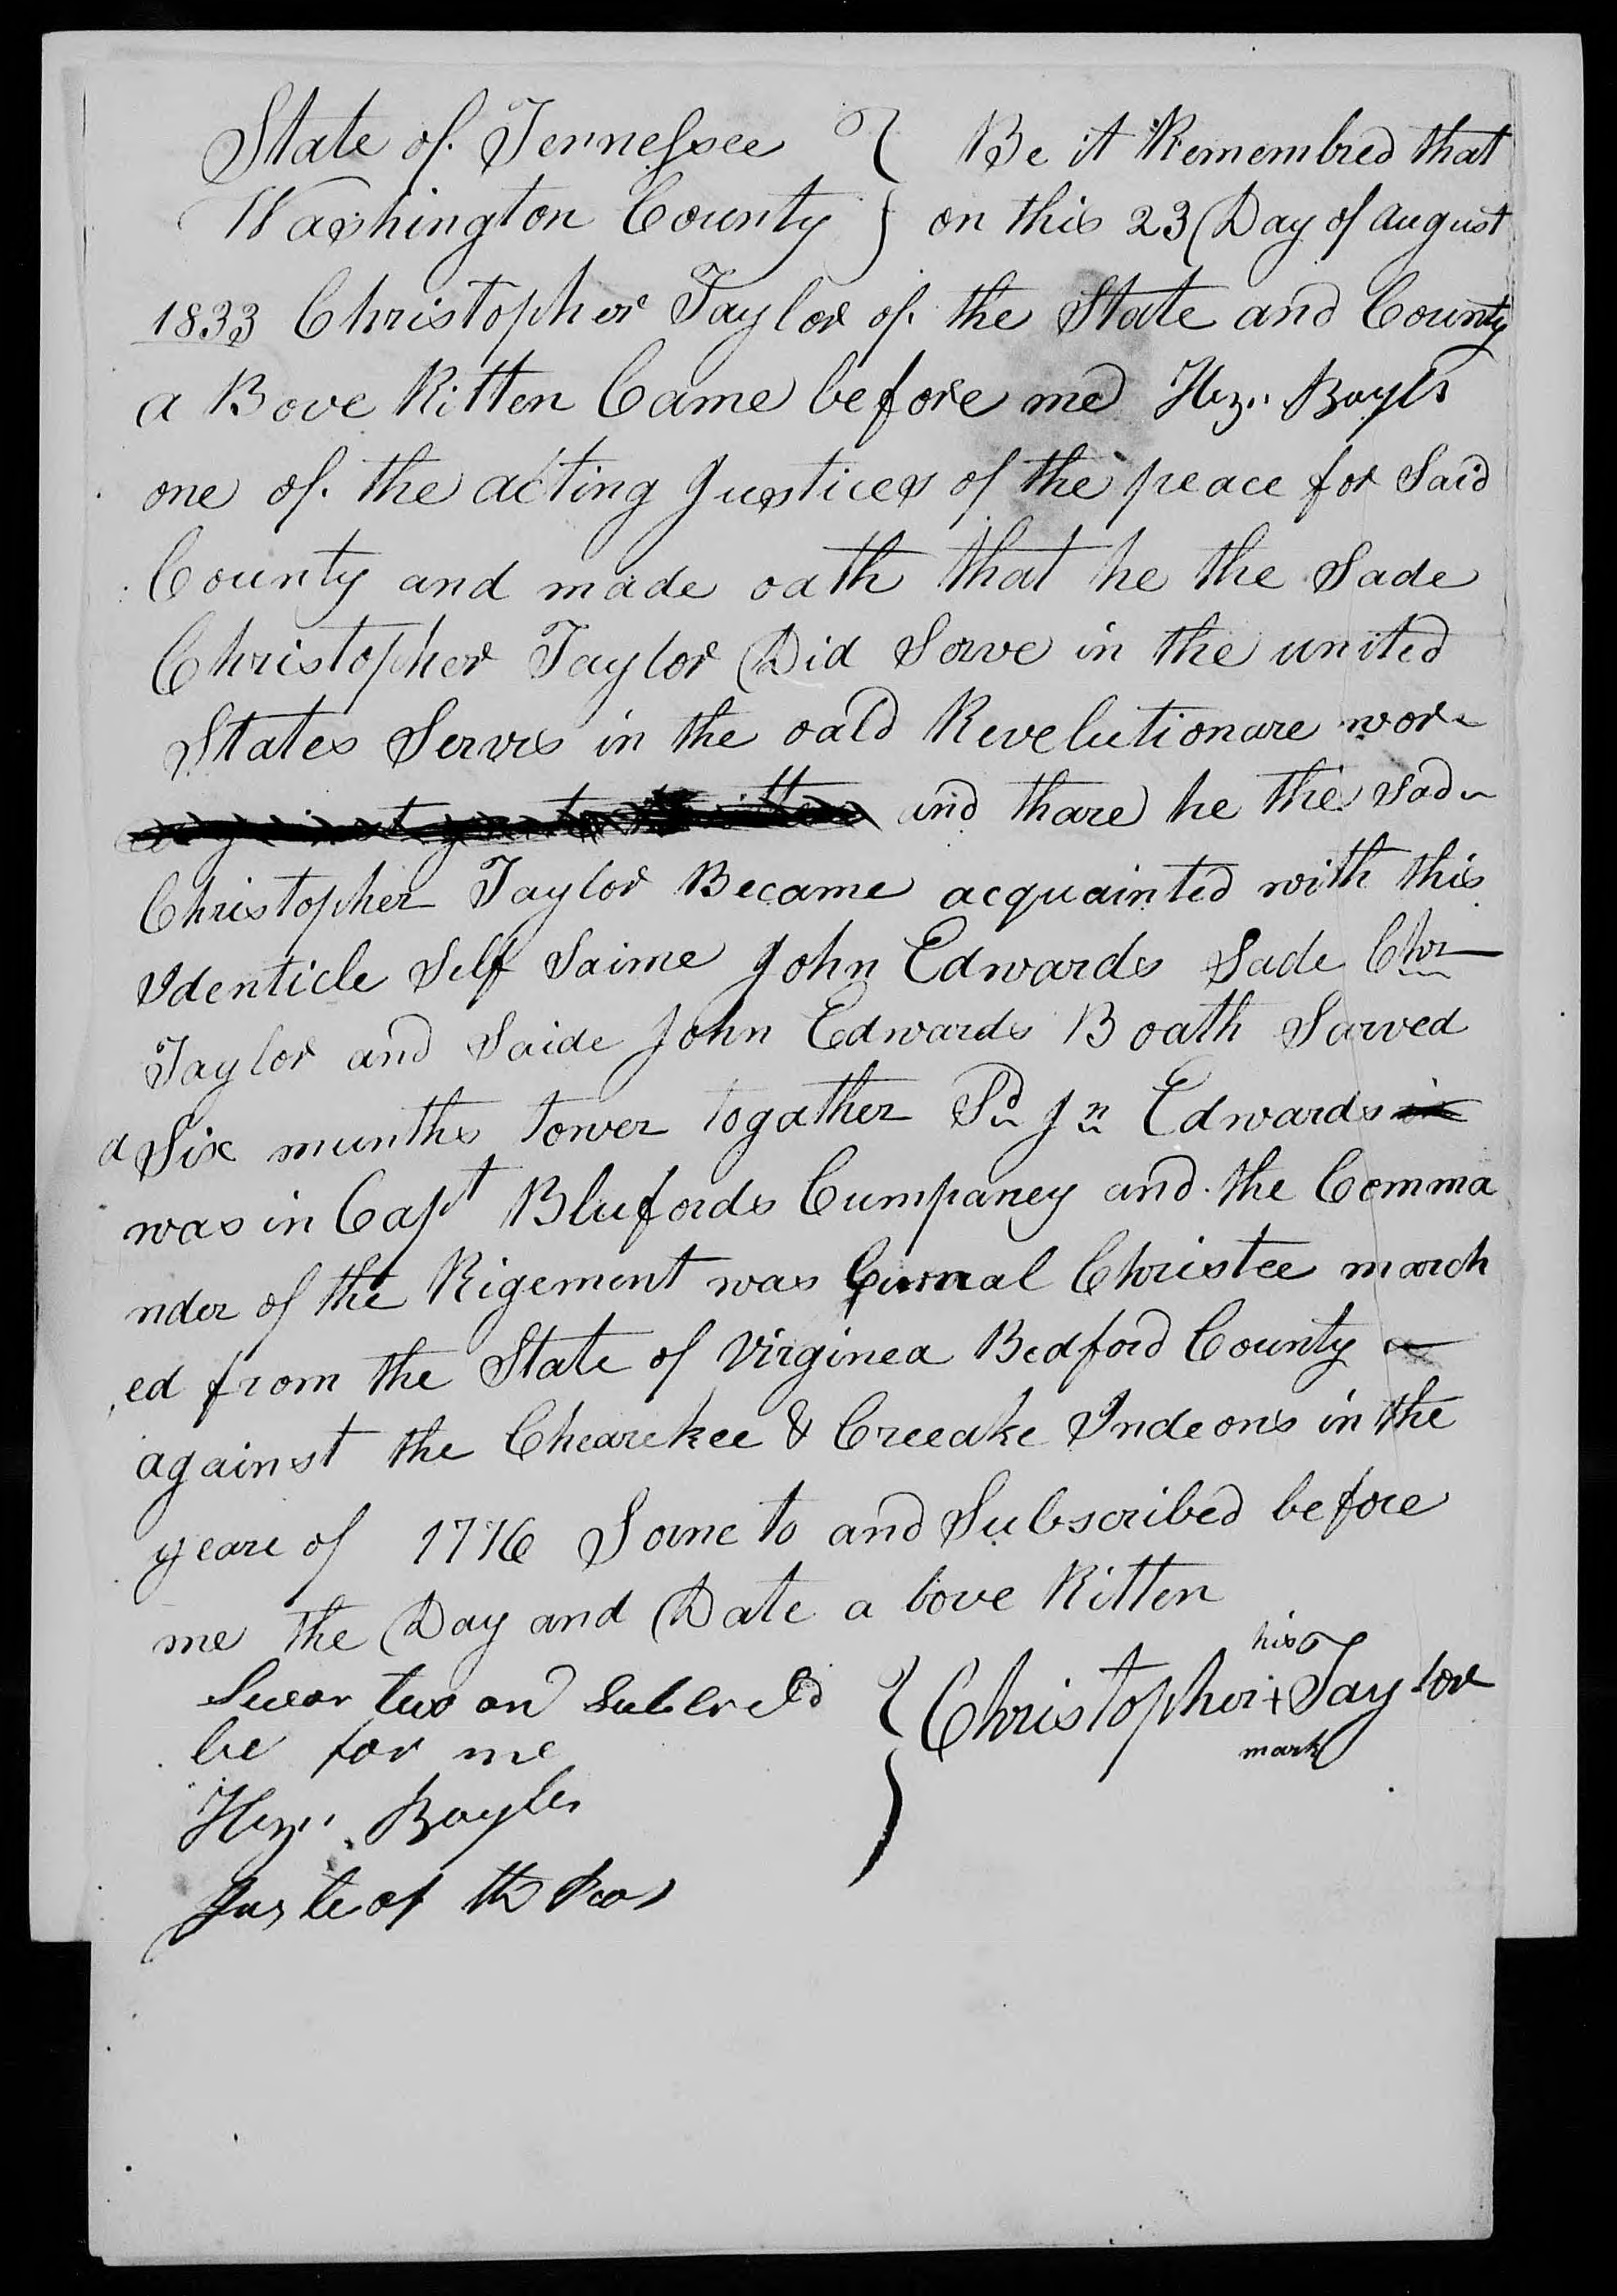 Affidavit of Christopher Taylor in support of a Pension Claim for John Edwards, 23 August 1833